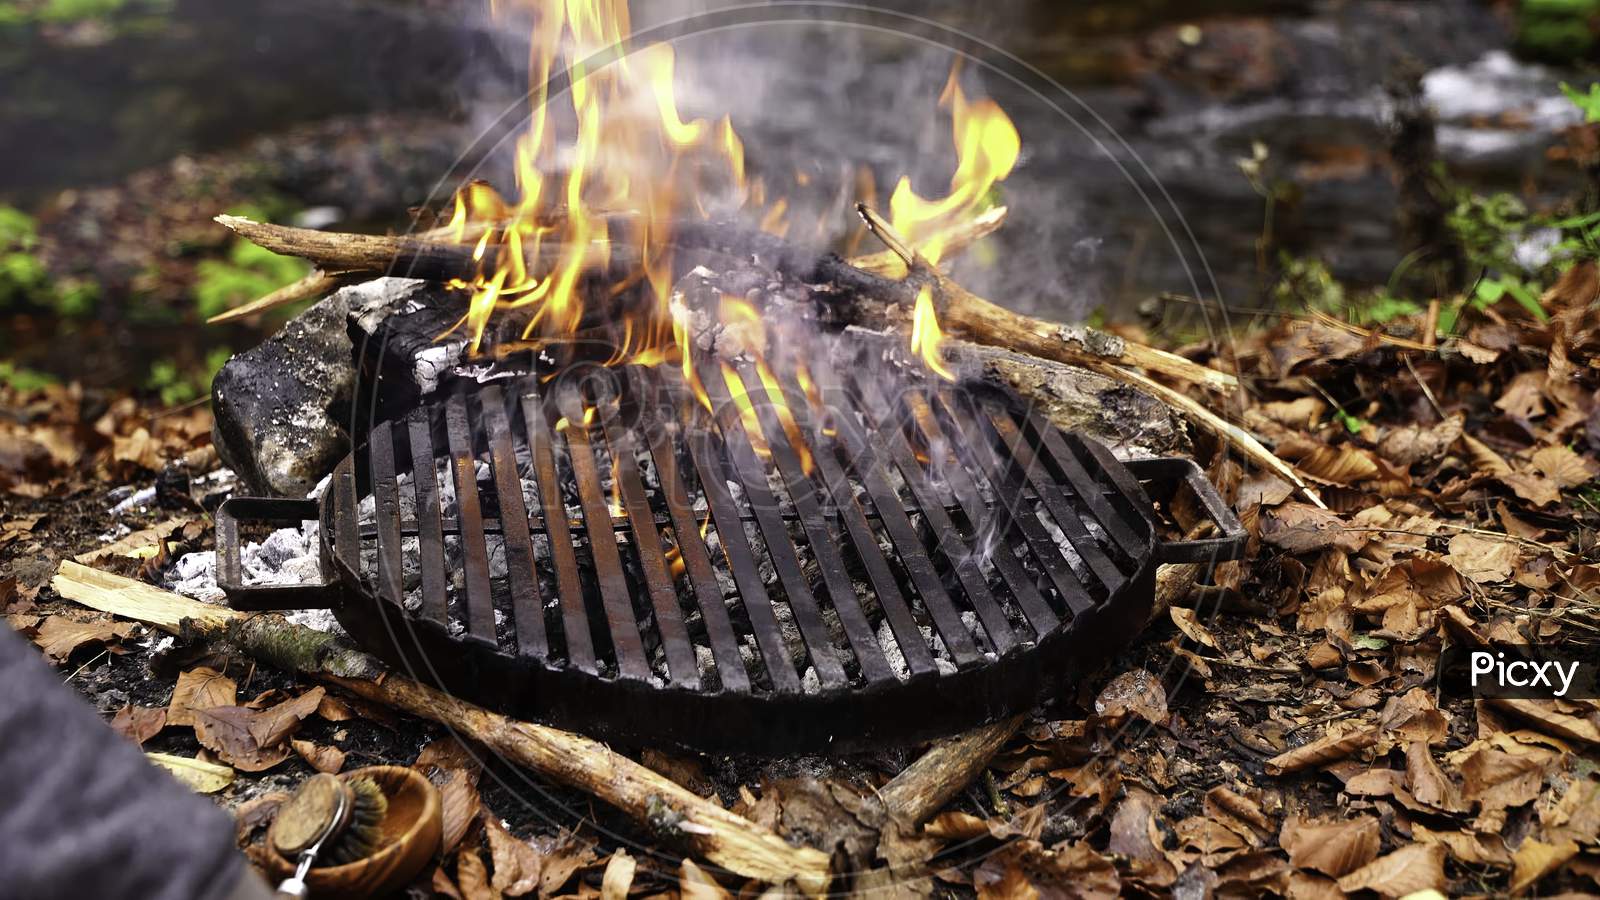 Blank Flaming BBQ Charcoal Grill, Closeup. Hot Barbeque Grill Ready Cooking Food On Cast Iron Grate. Concept For Cookout, Barbecue Party At Garden Or Backyard. Grill With Bright Flames Black Isolated.